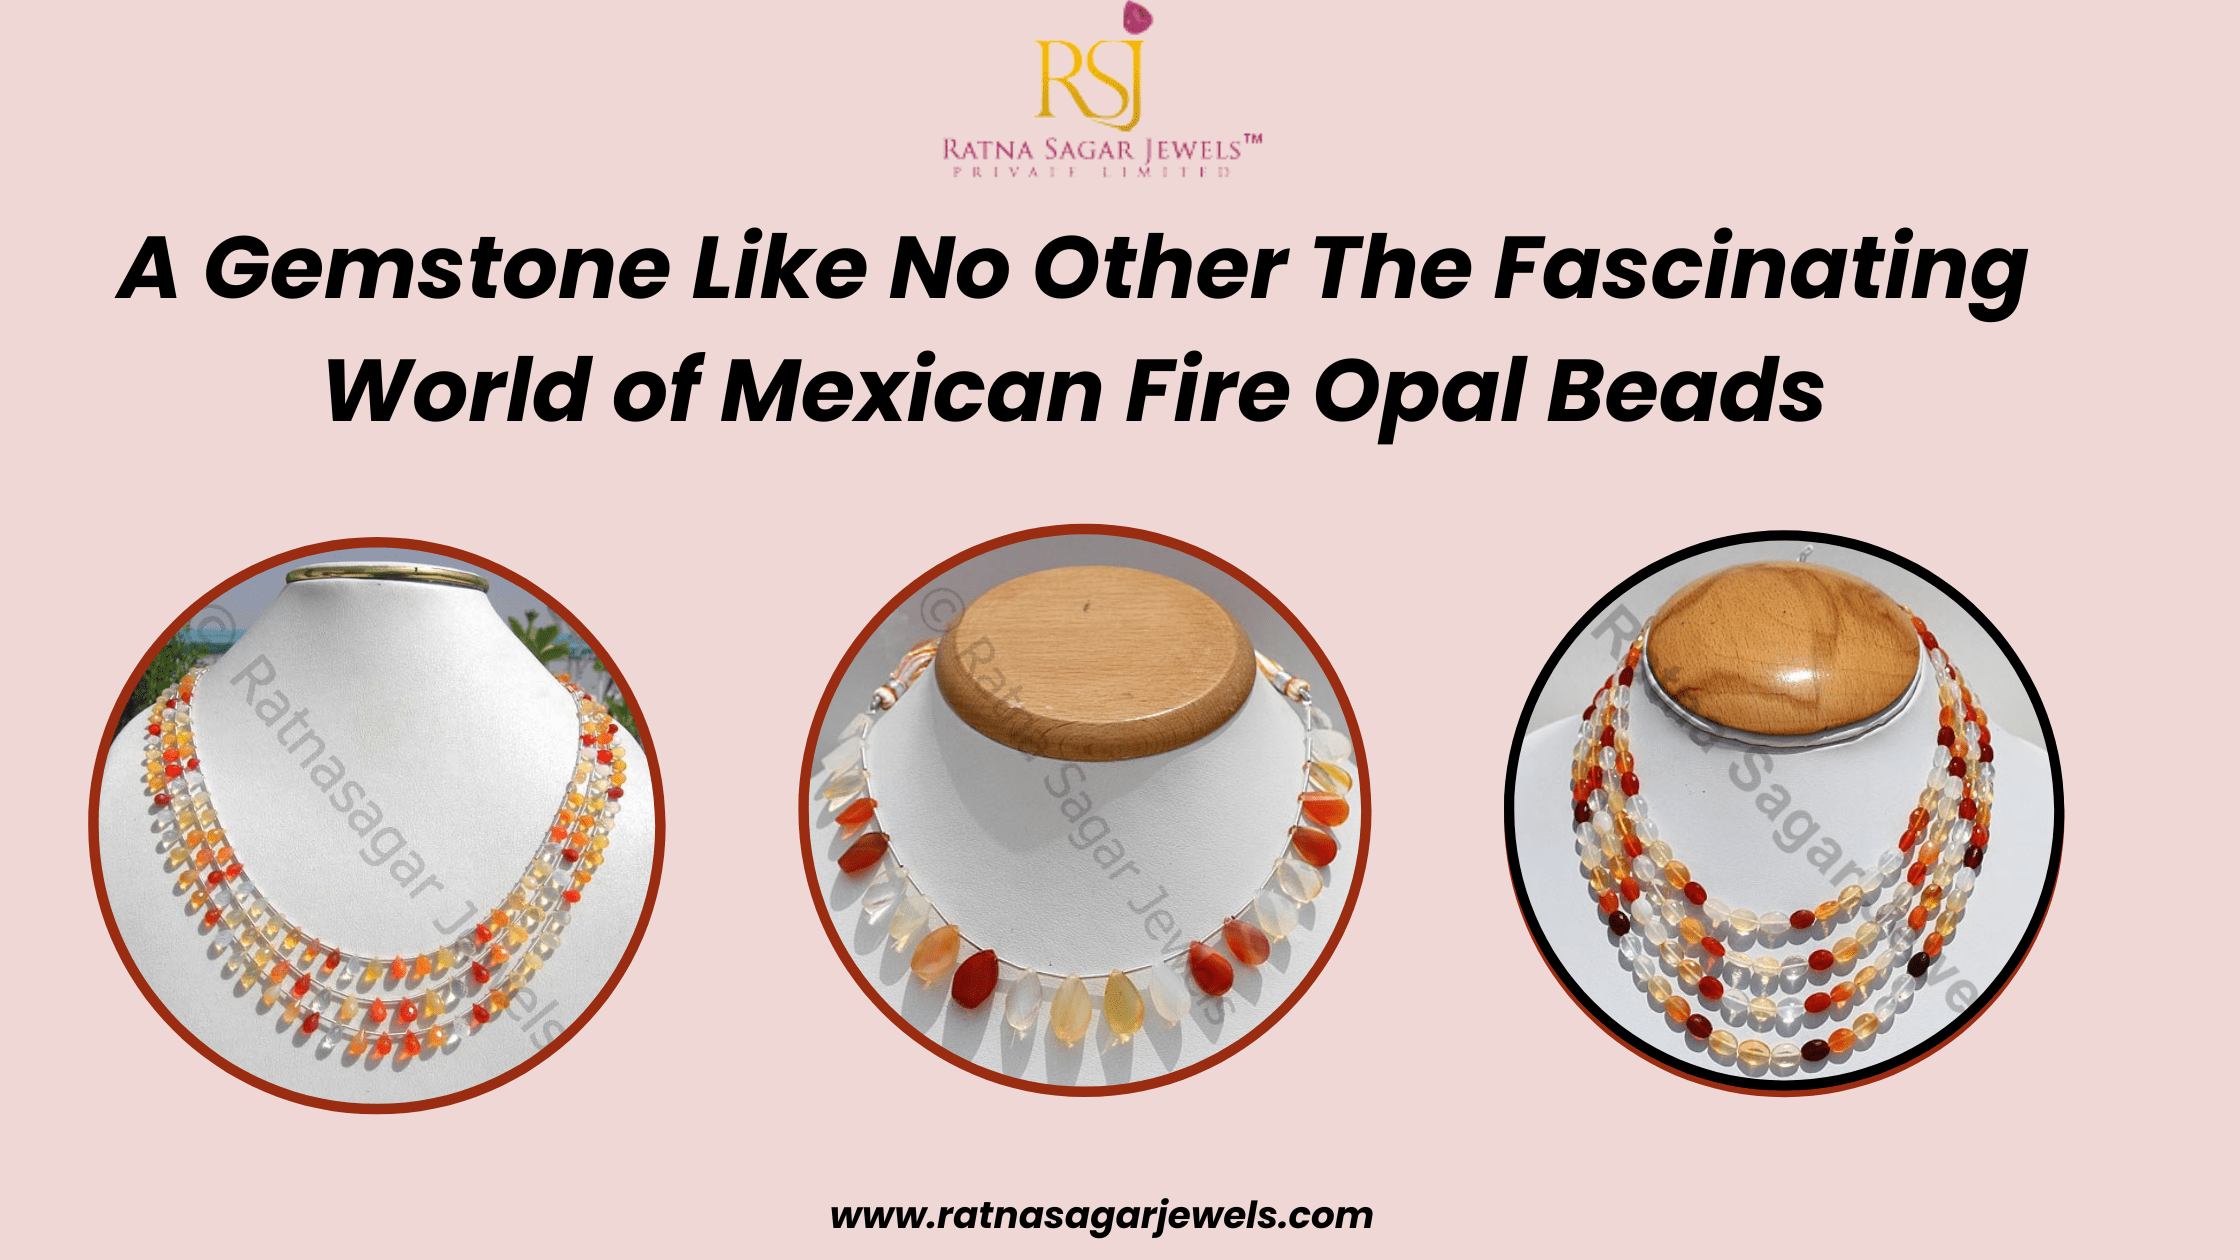 A Gemstone Like No Other: The Fascinating World of Mexican Fire Opal Beads